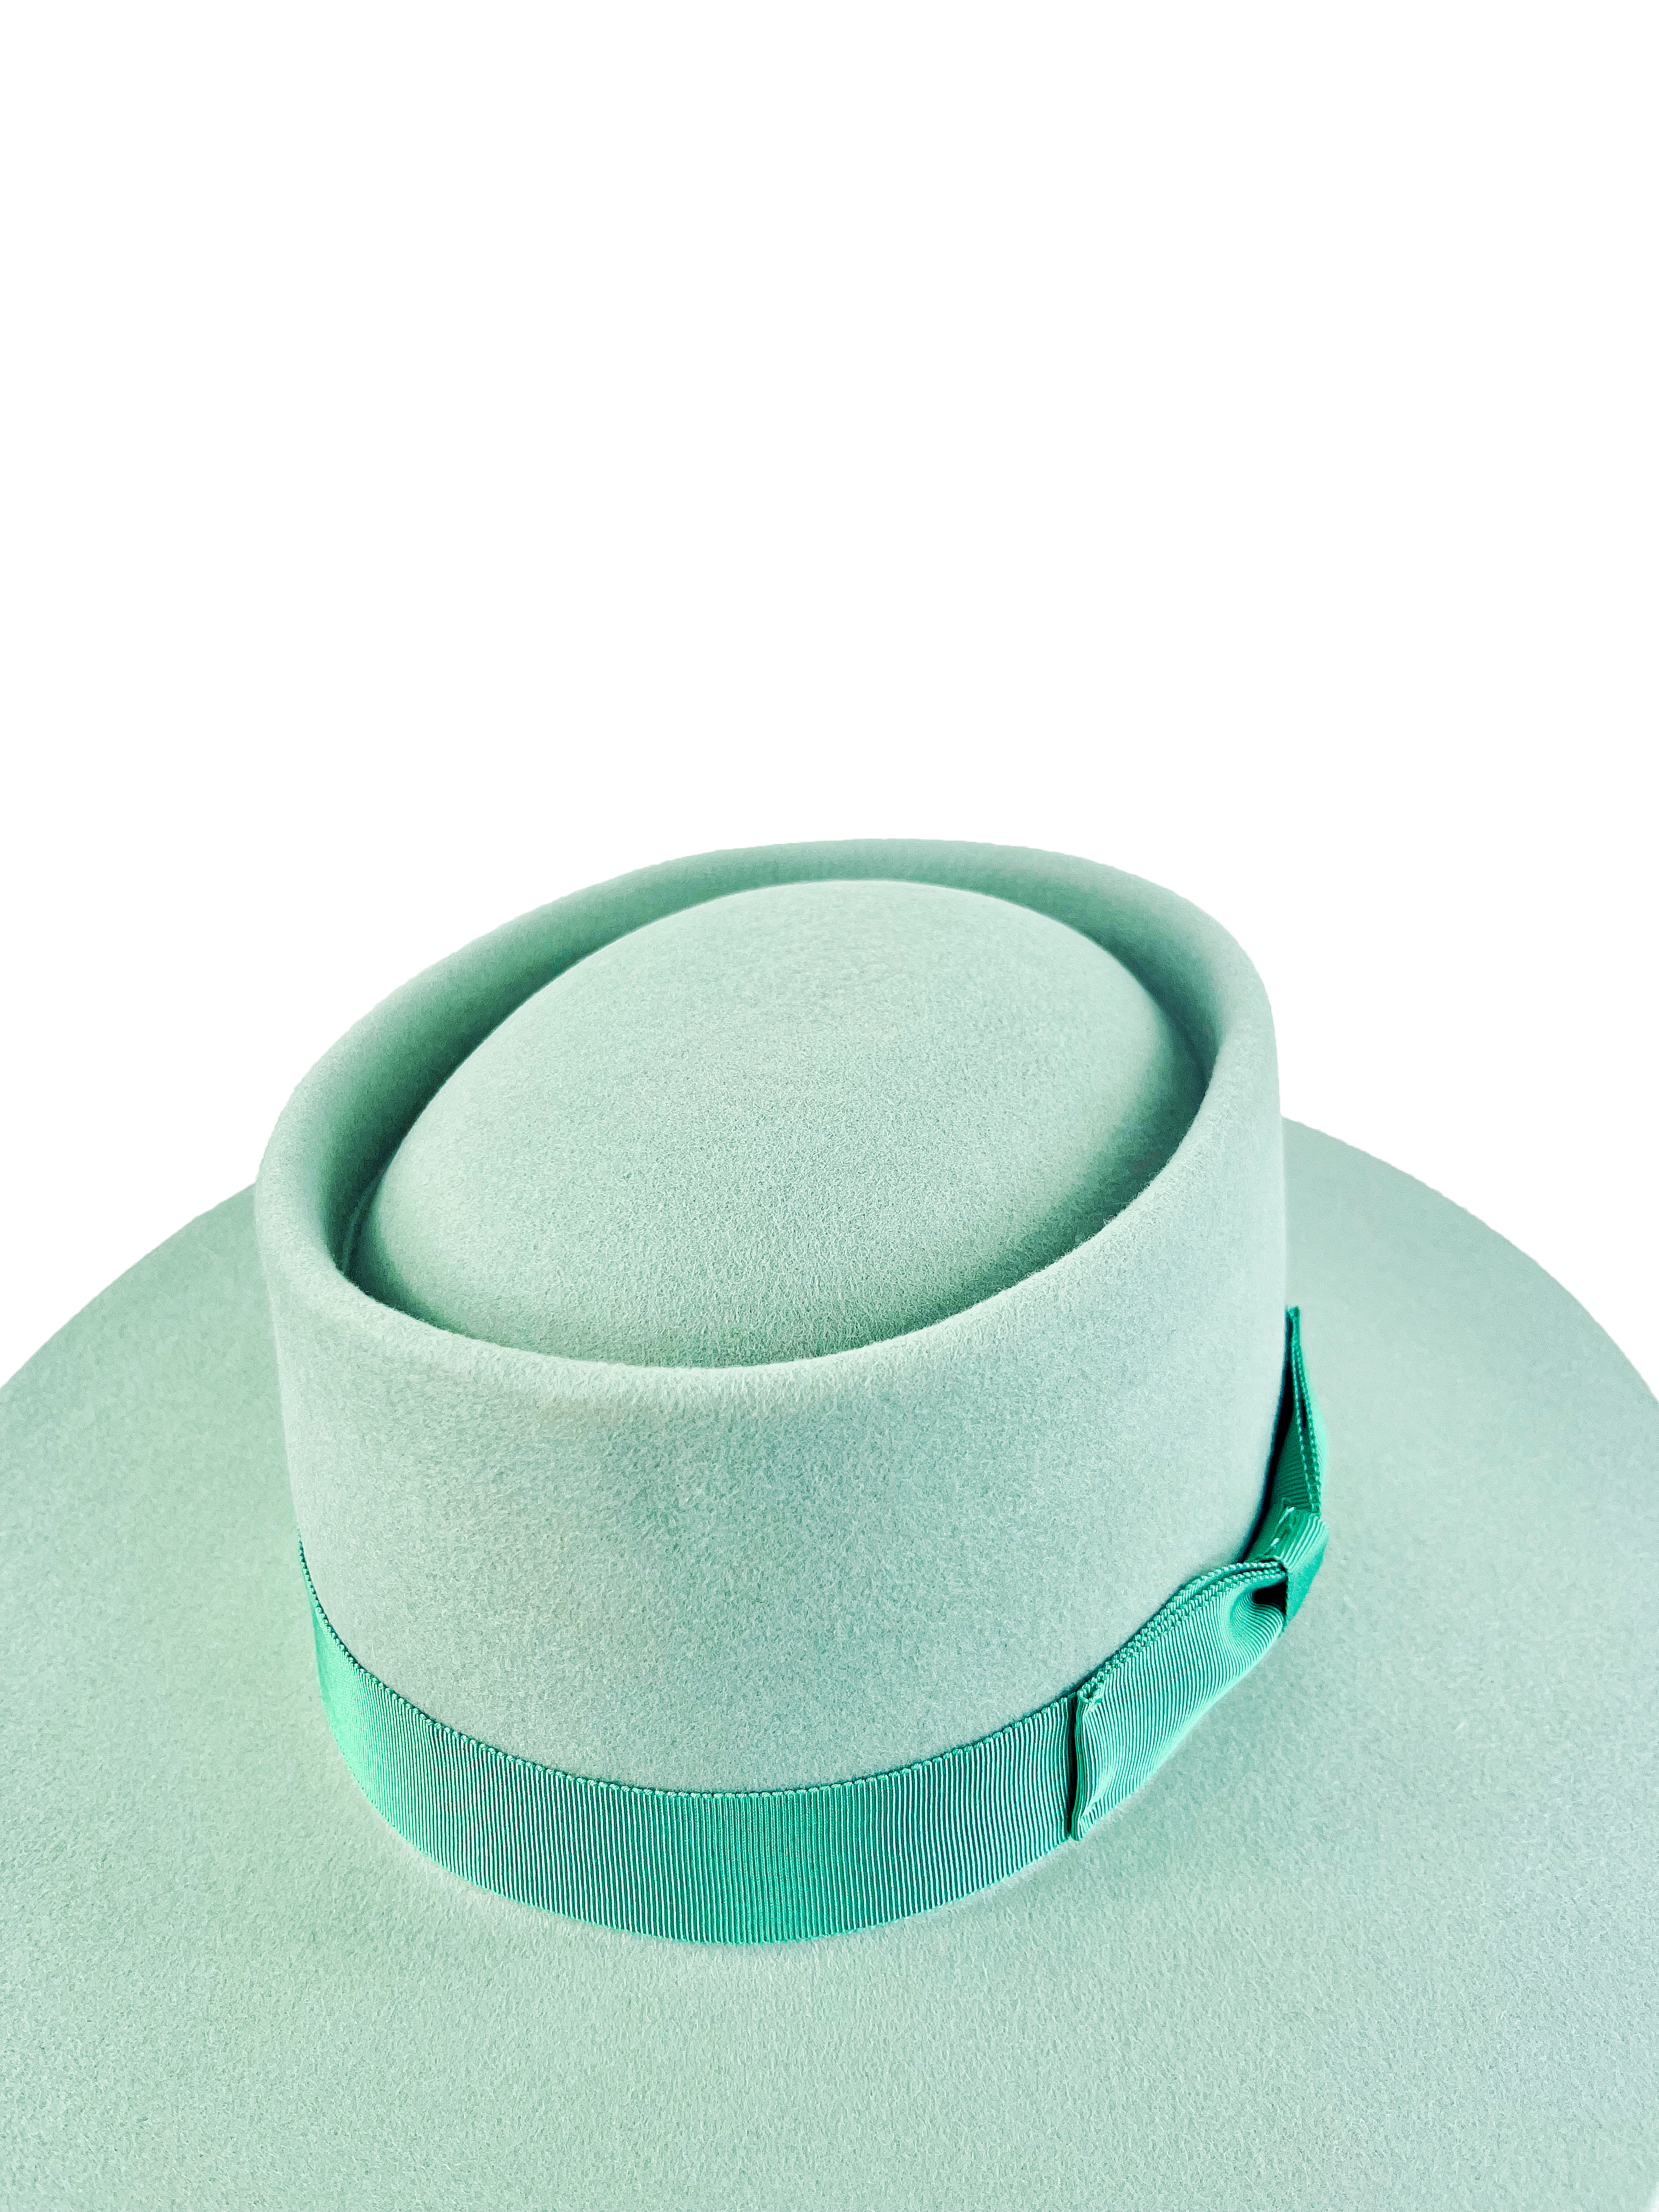 Kayo Boater Hat - Mint Green